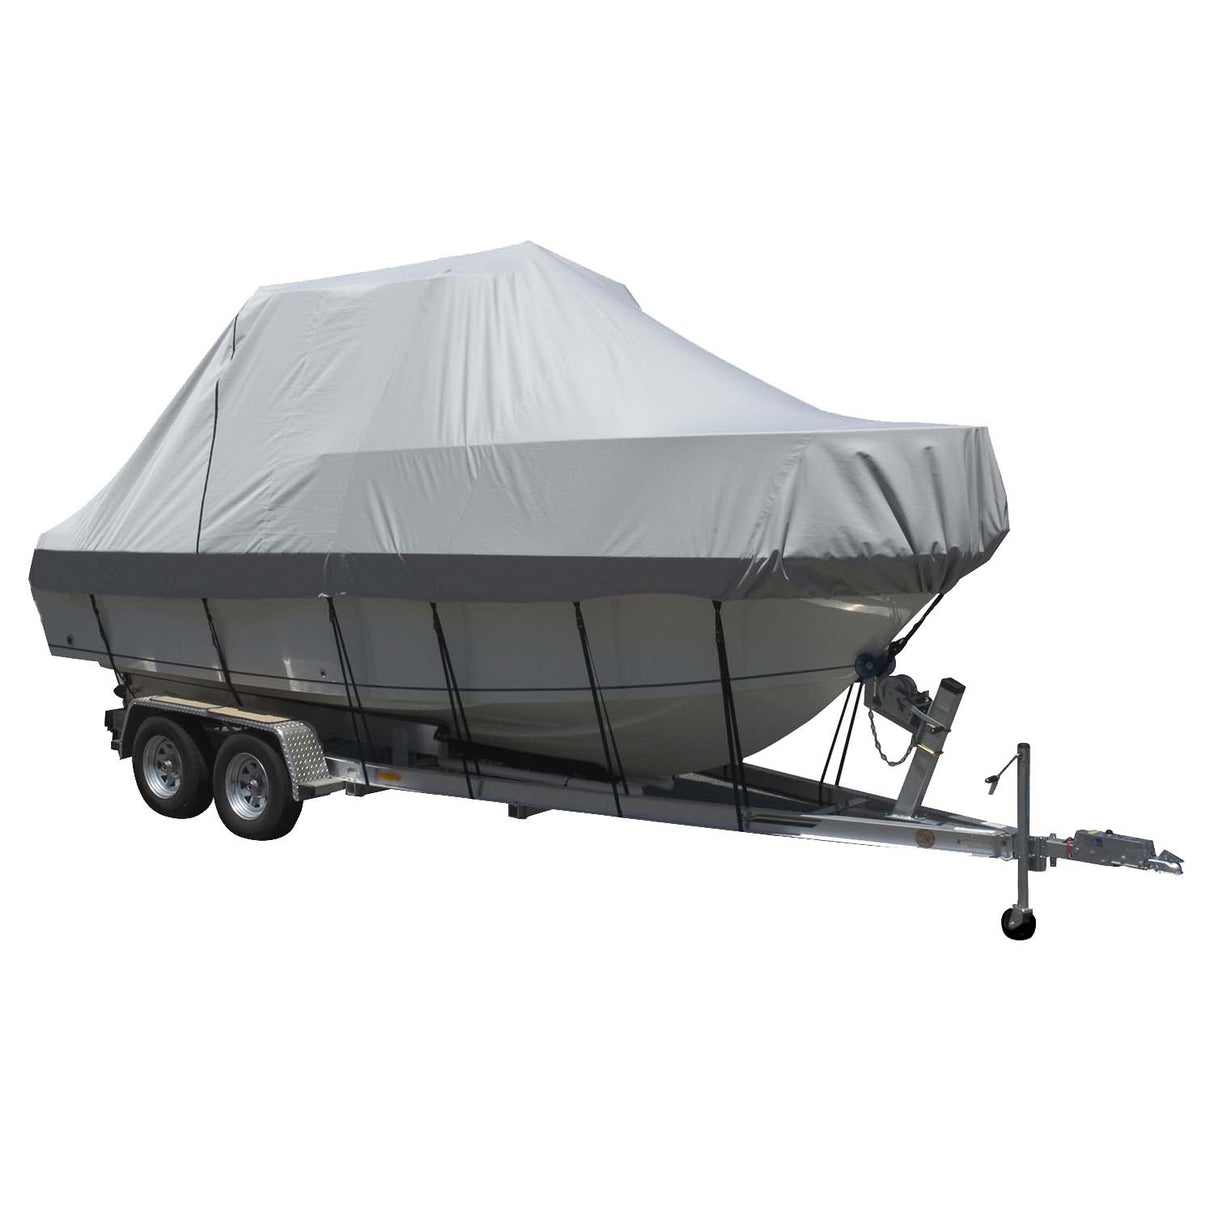 Carver Sun-DURA Specialty Boat Cover f/21.5 Walk Around Cuddy Center Console Boats - Grey - Life Raft Professionals